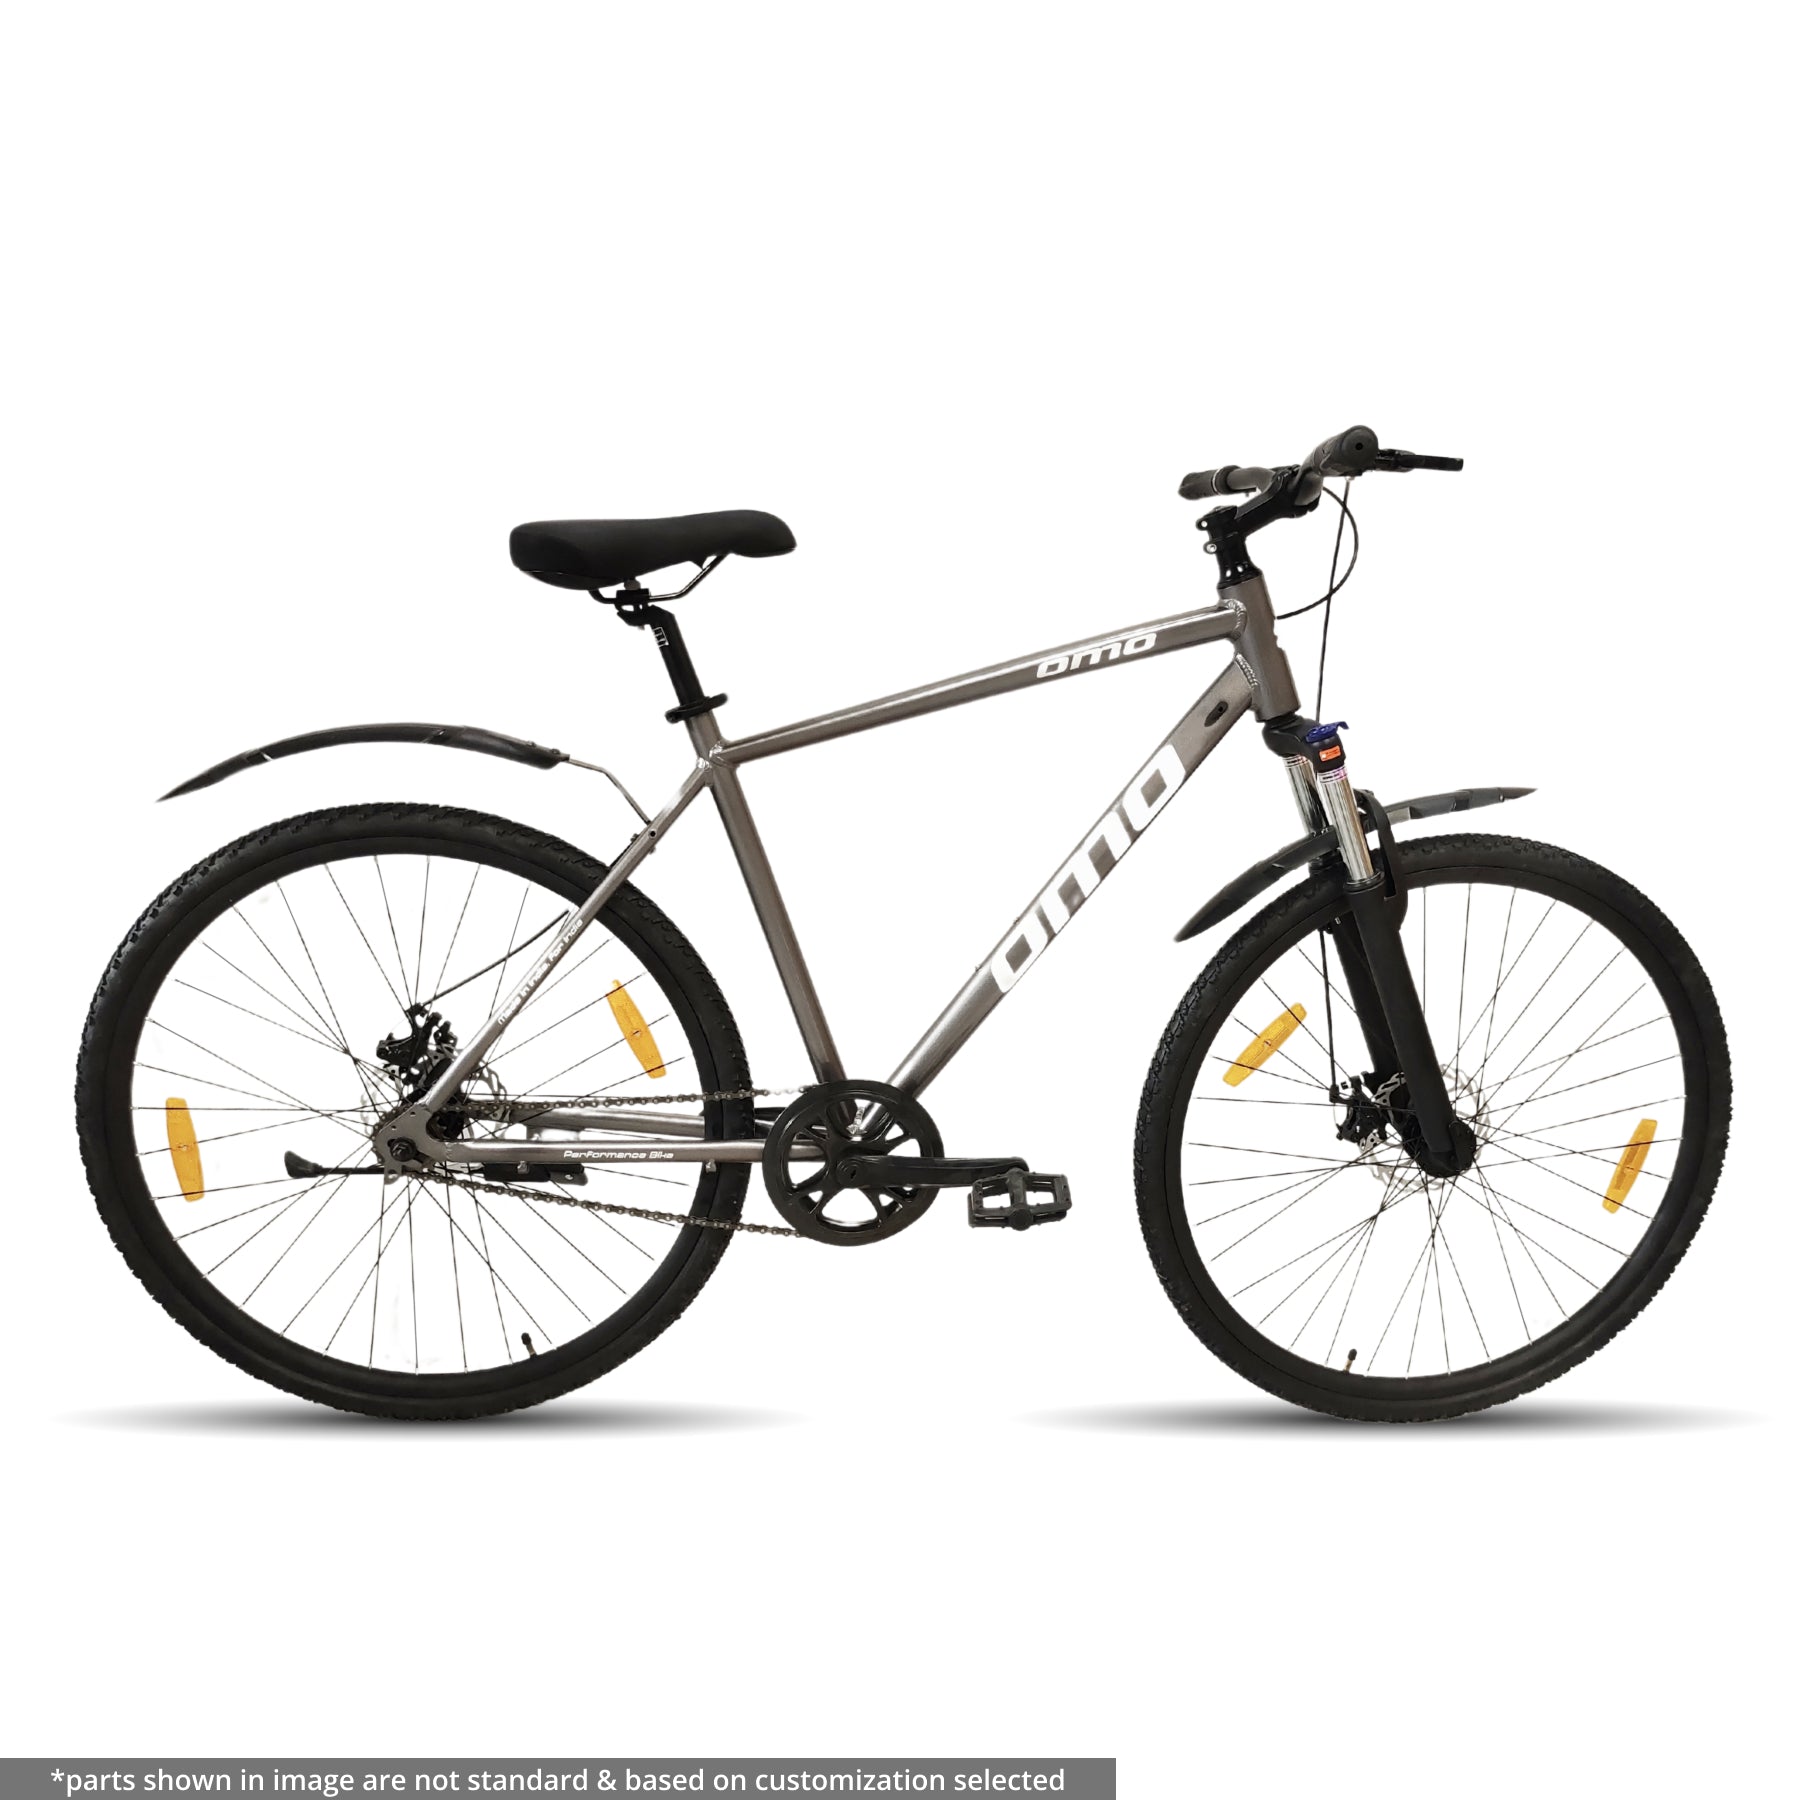 omobikes ladakh x1 alloy frame hybrid bike with disc brake under 15000 and lockout suspension grey color